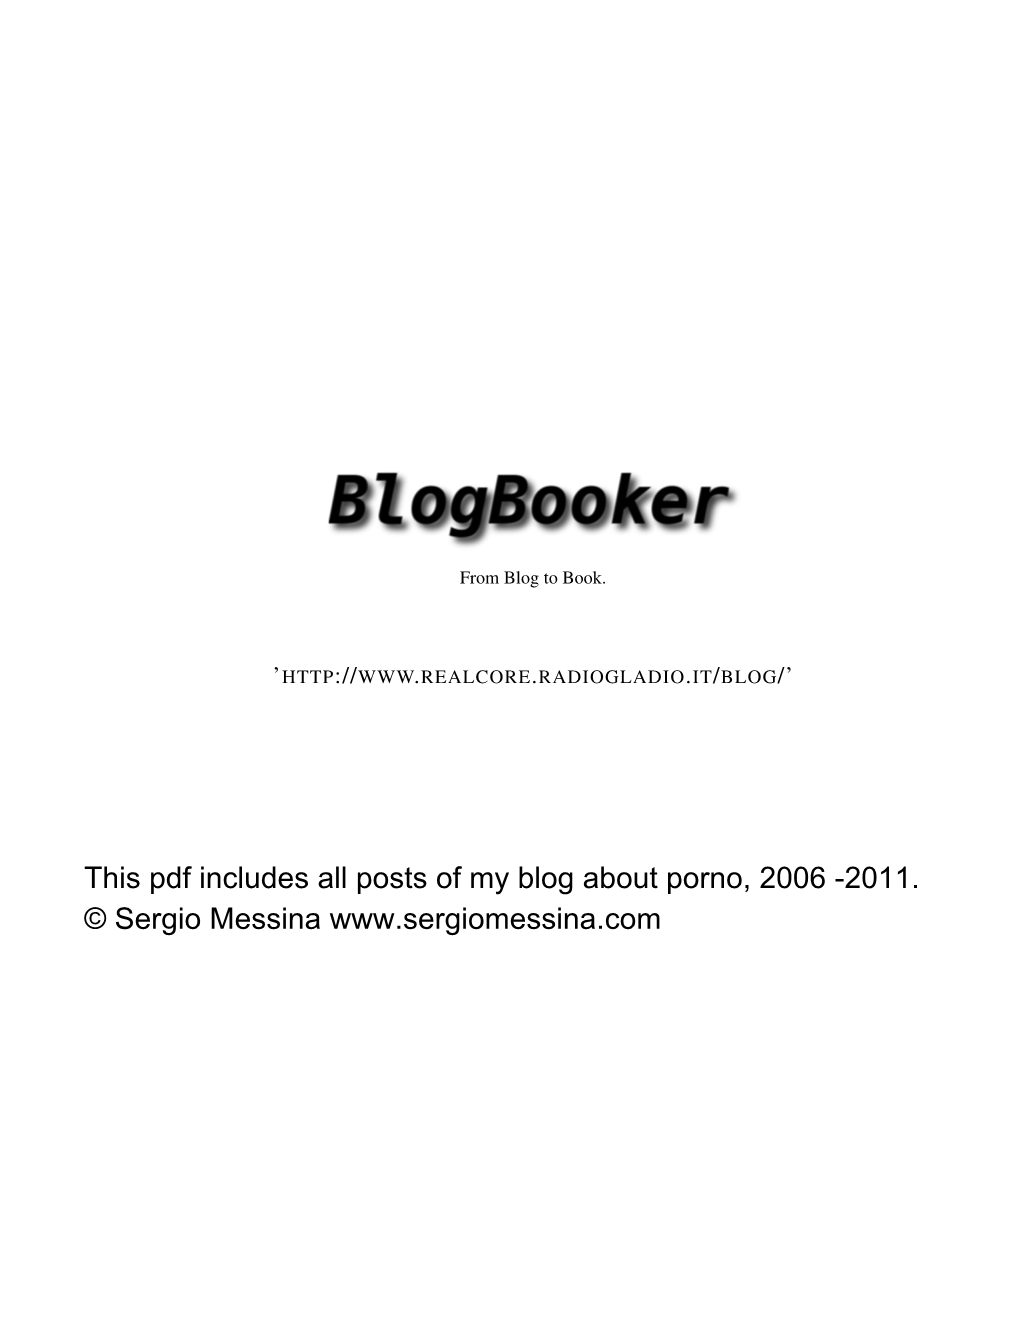 This Pdf Includes All Posts of My Blog About Porno, 2006 -2011. © Sergio Messina